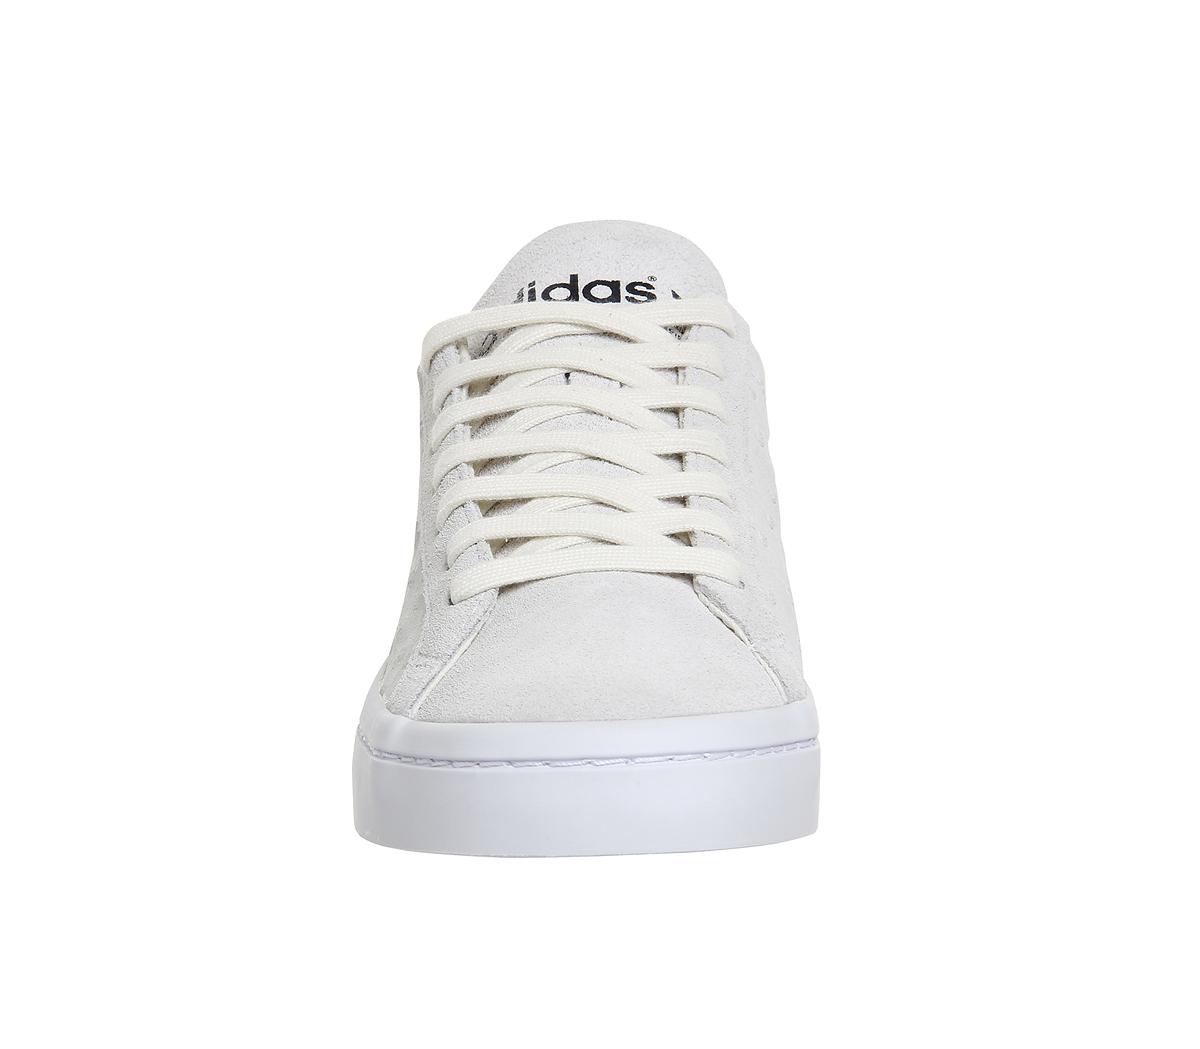 adidas Originals Court Vantage W Perforated Leather Sneakers in White | Lyst